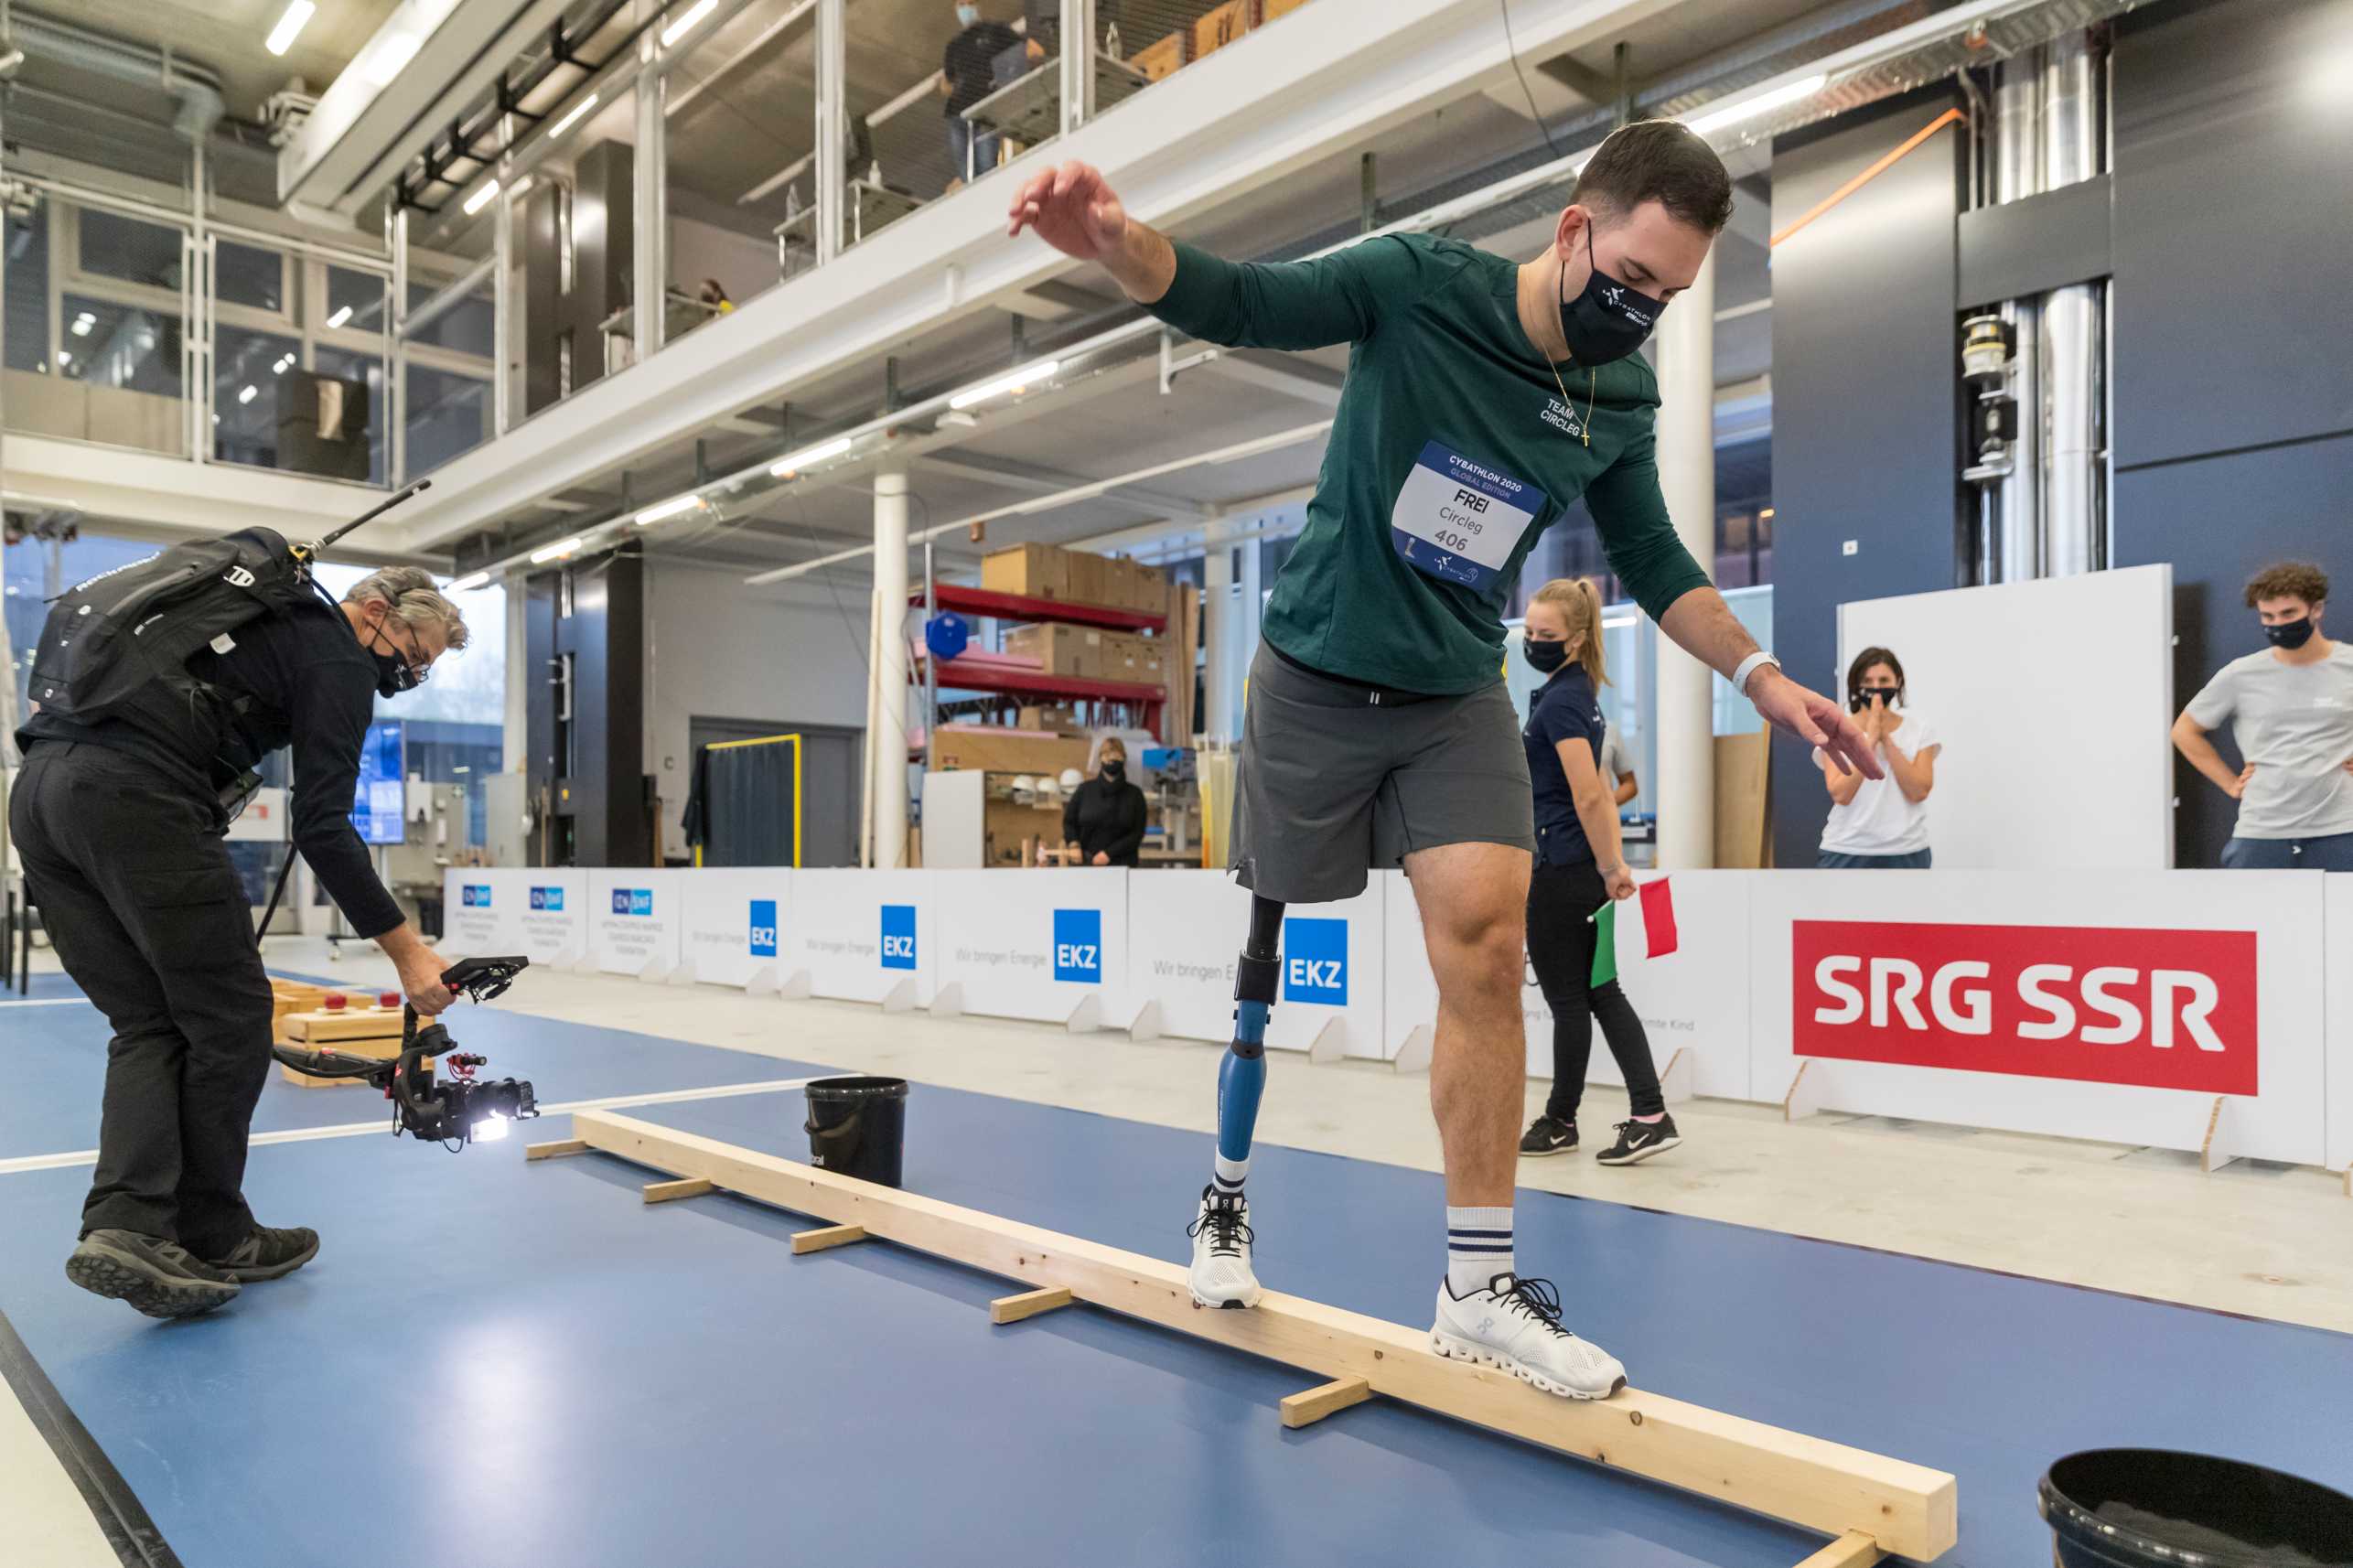 A man with a leg prosthesis on his right leg is balancing over a wooden obstacle. The obstacle is about two meters long and ten centimeters high. A camera man is behind him filming.